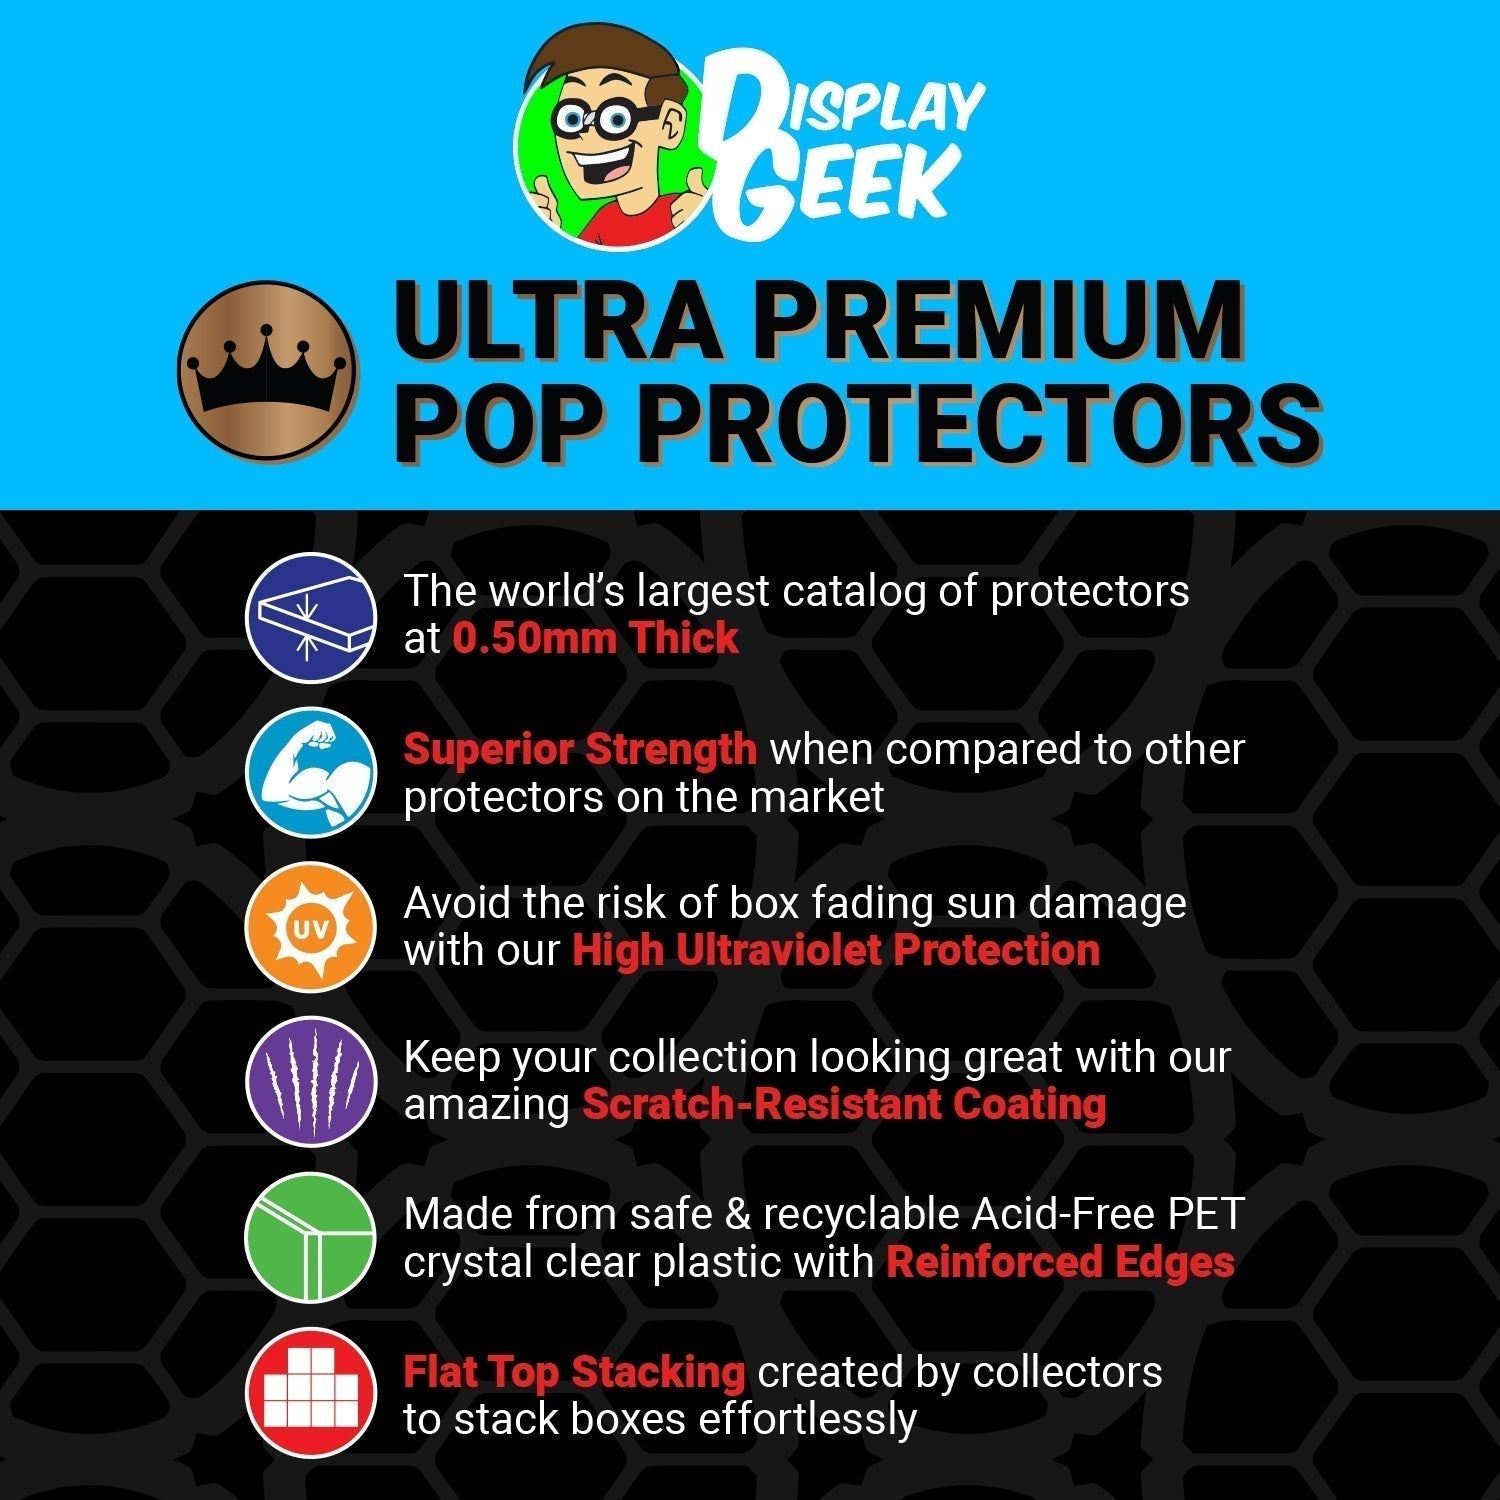 Pop Protector for Appa FunkO's Cereal Box - PPG Pop Protector Guide Search Created by Display Geek